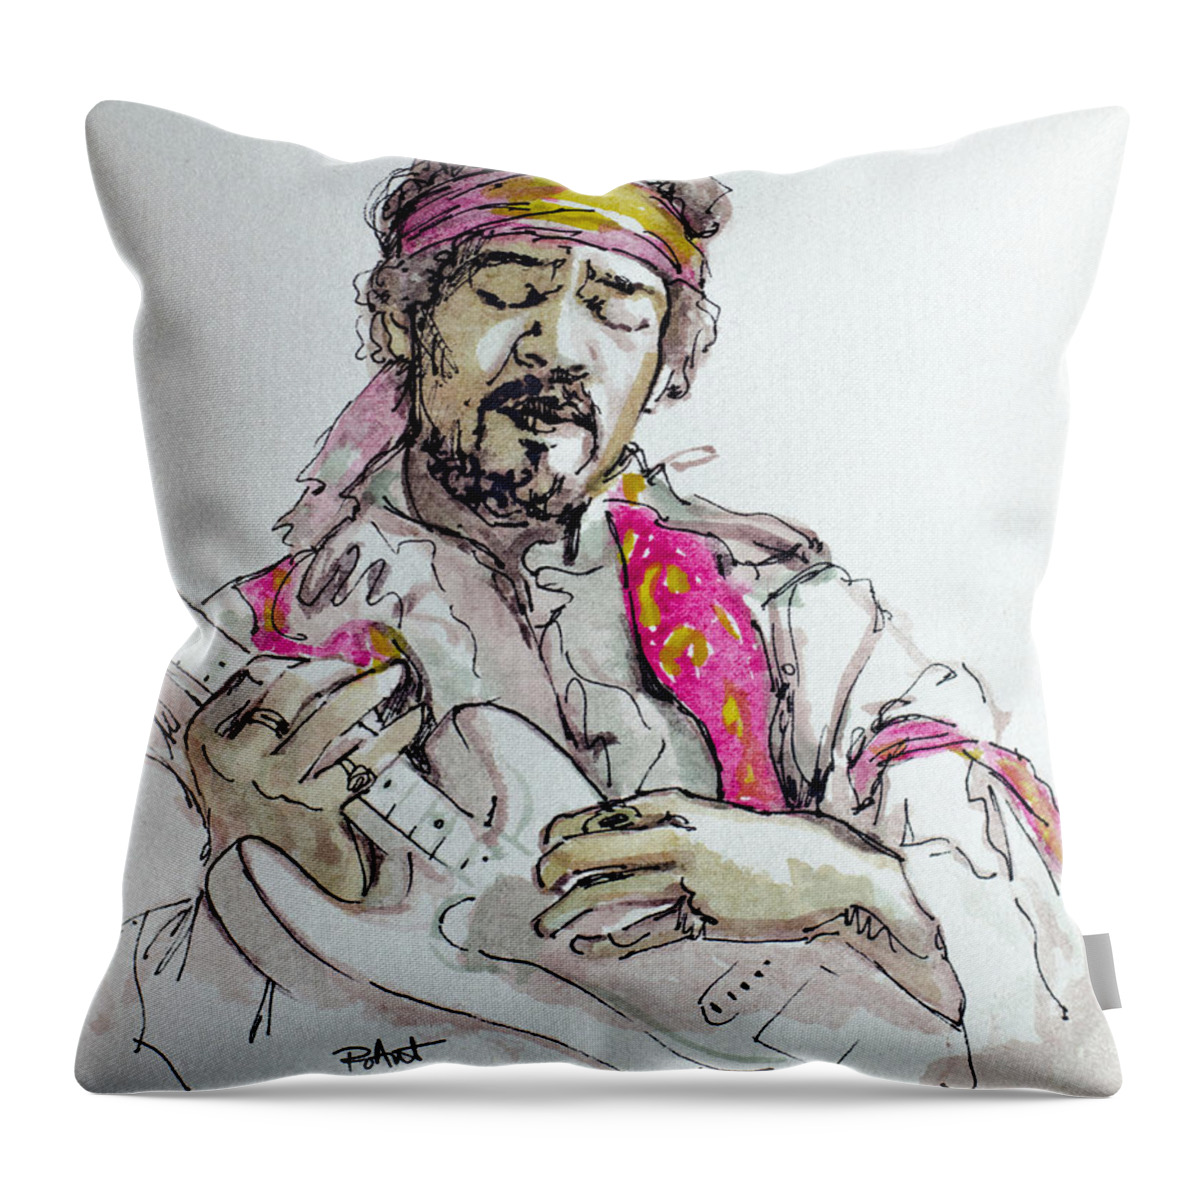 Jimi Hendrix Throw Pillow featuring the painting Hendrix by Laur Iduc